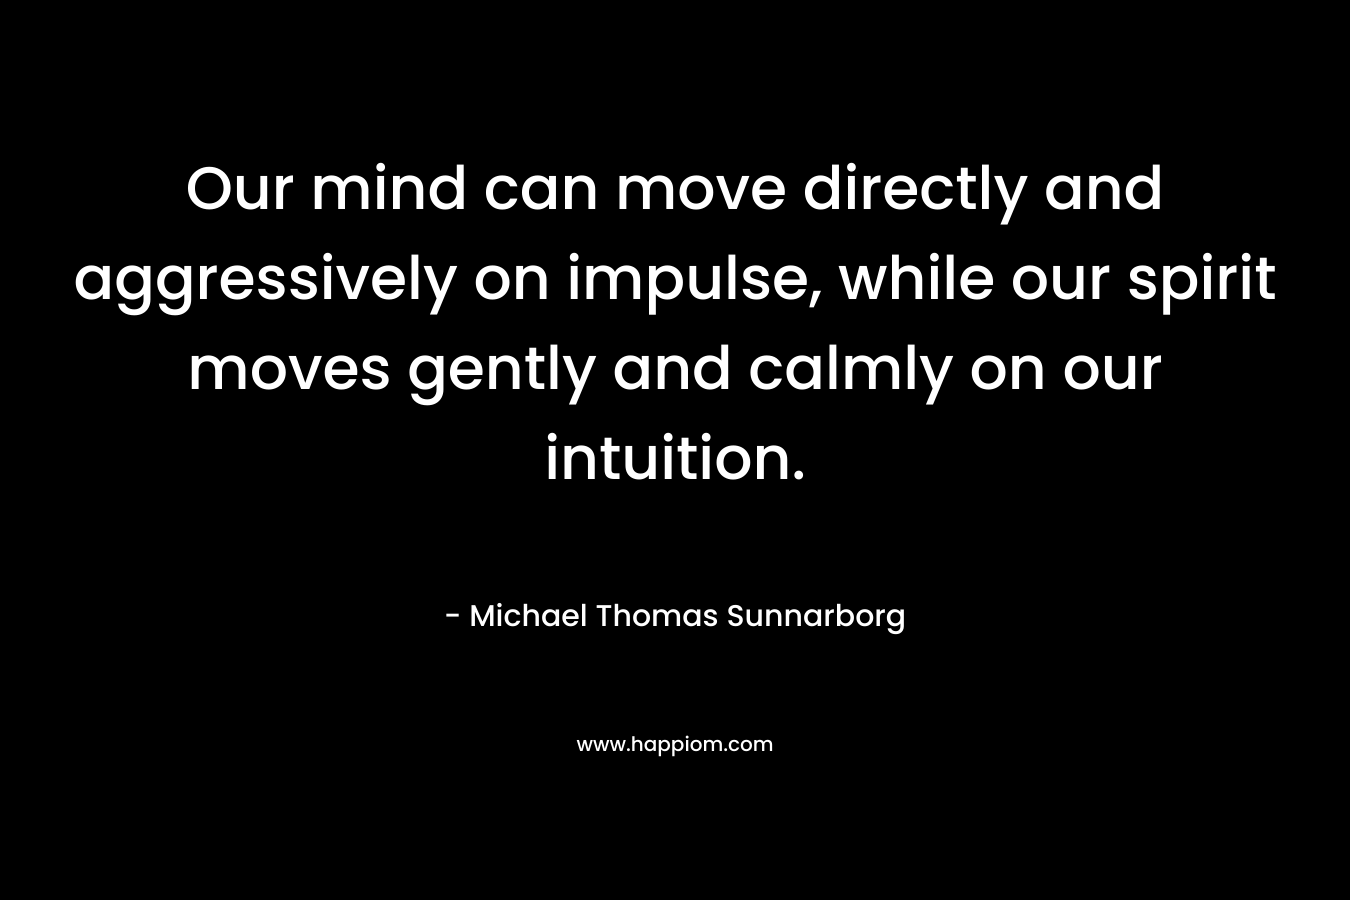 Our mind can move directly and aggressively on impulse, while our spirit moves gently and calmly on our intuition.